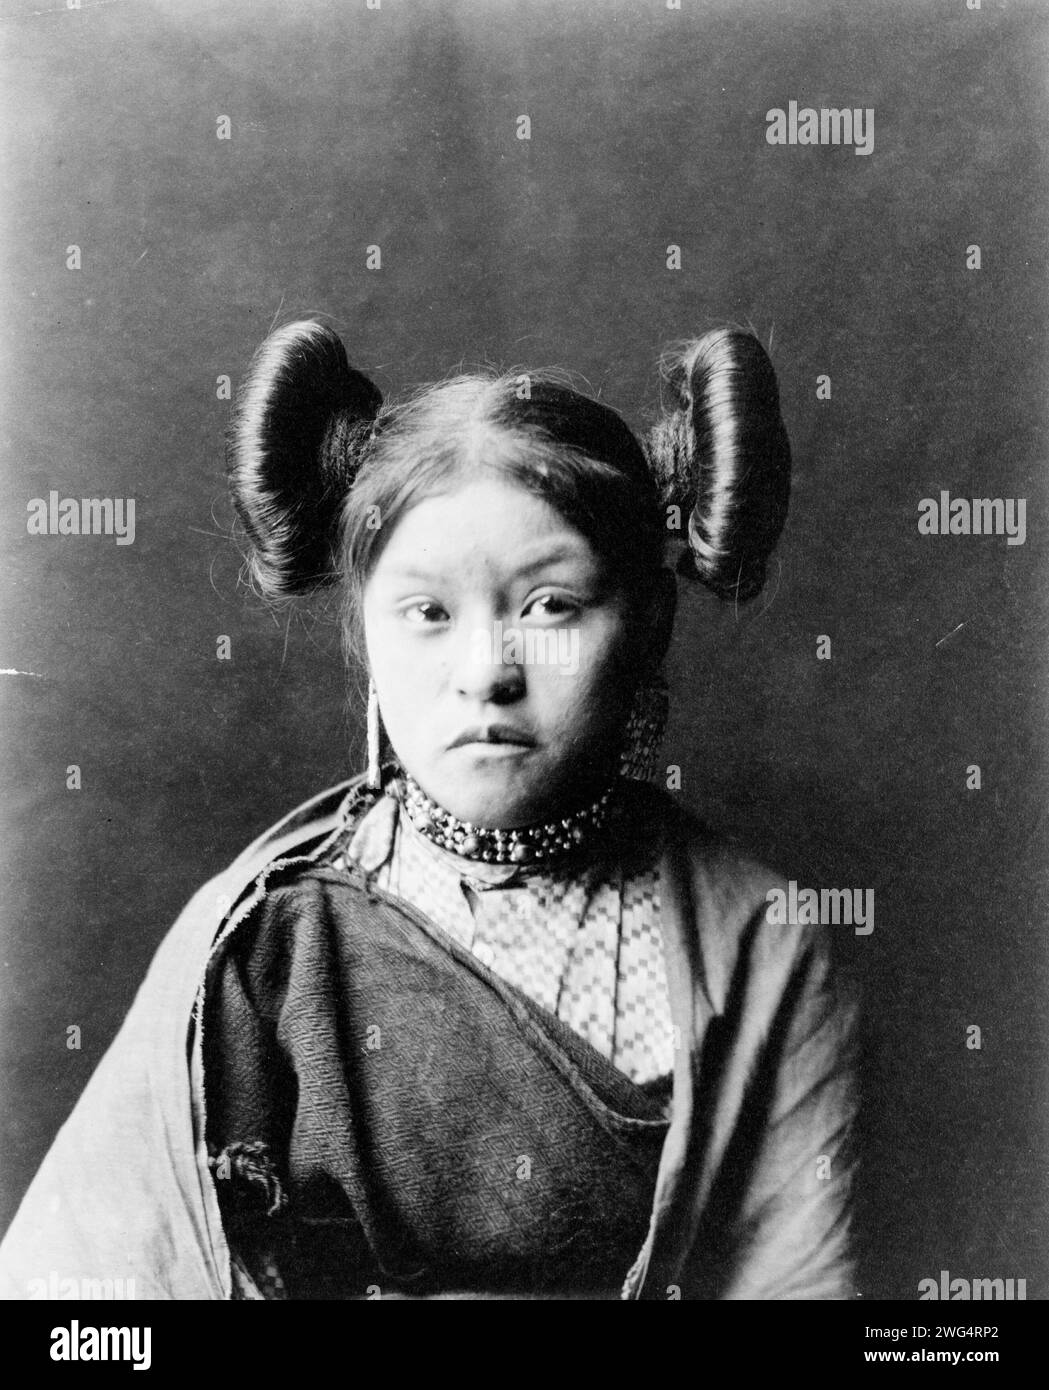 Gobuguoy, Walpi girl, half-length portrait, facing front, hair tied in swirls on sides of head, metal bead and bell choker, printed cotton dress, cotton shawl around shoulders, c1900. Stock Photo